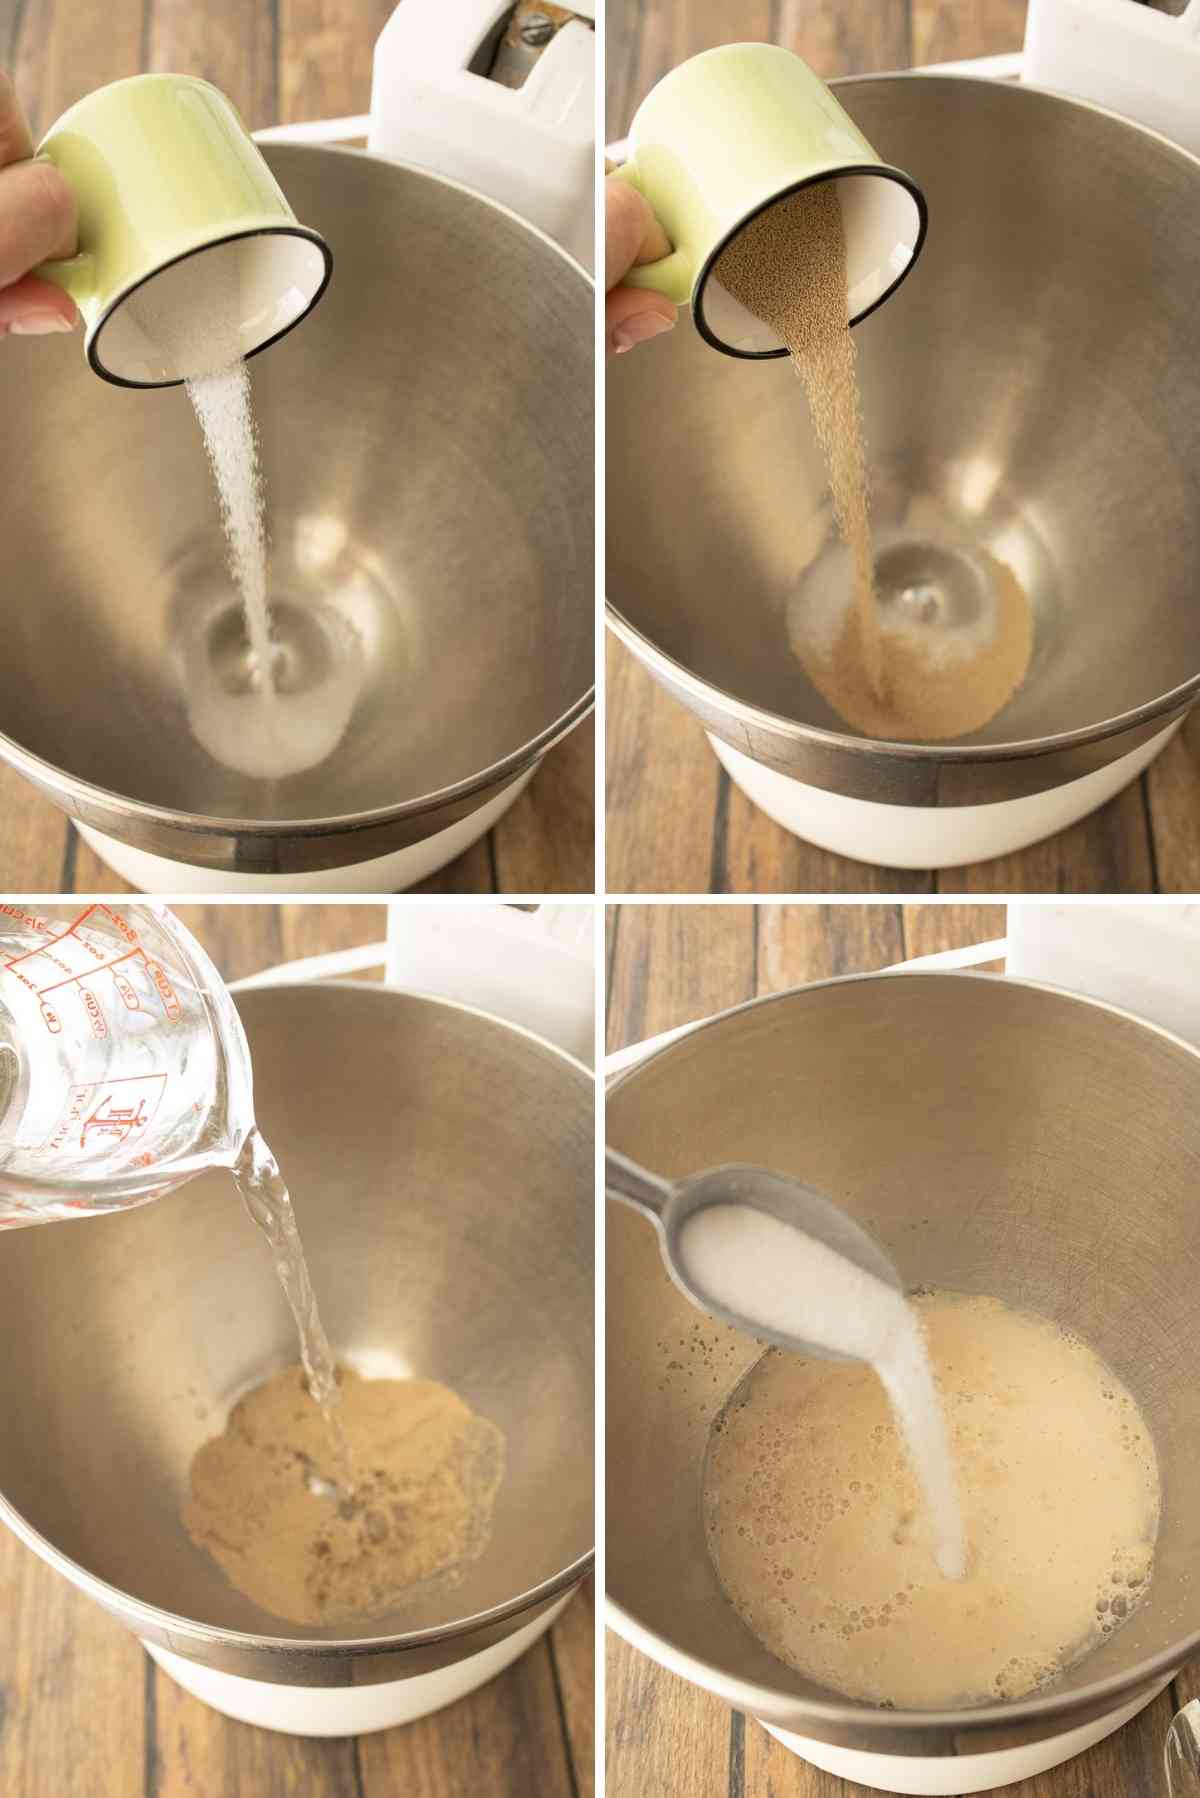 Activate yeast with sugar and warm water.